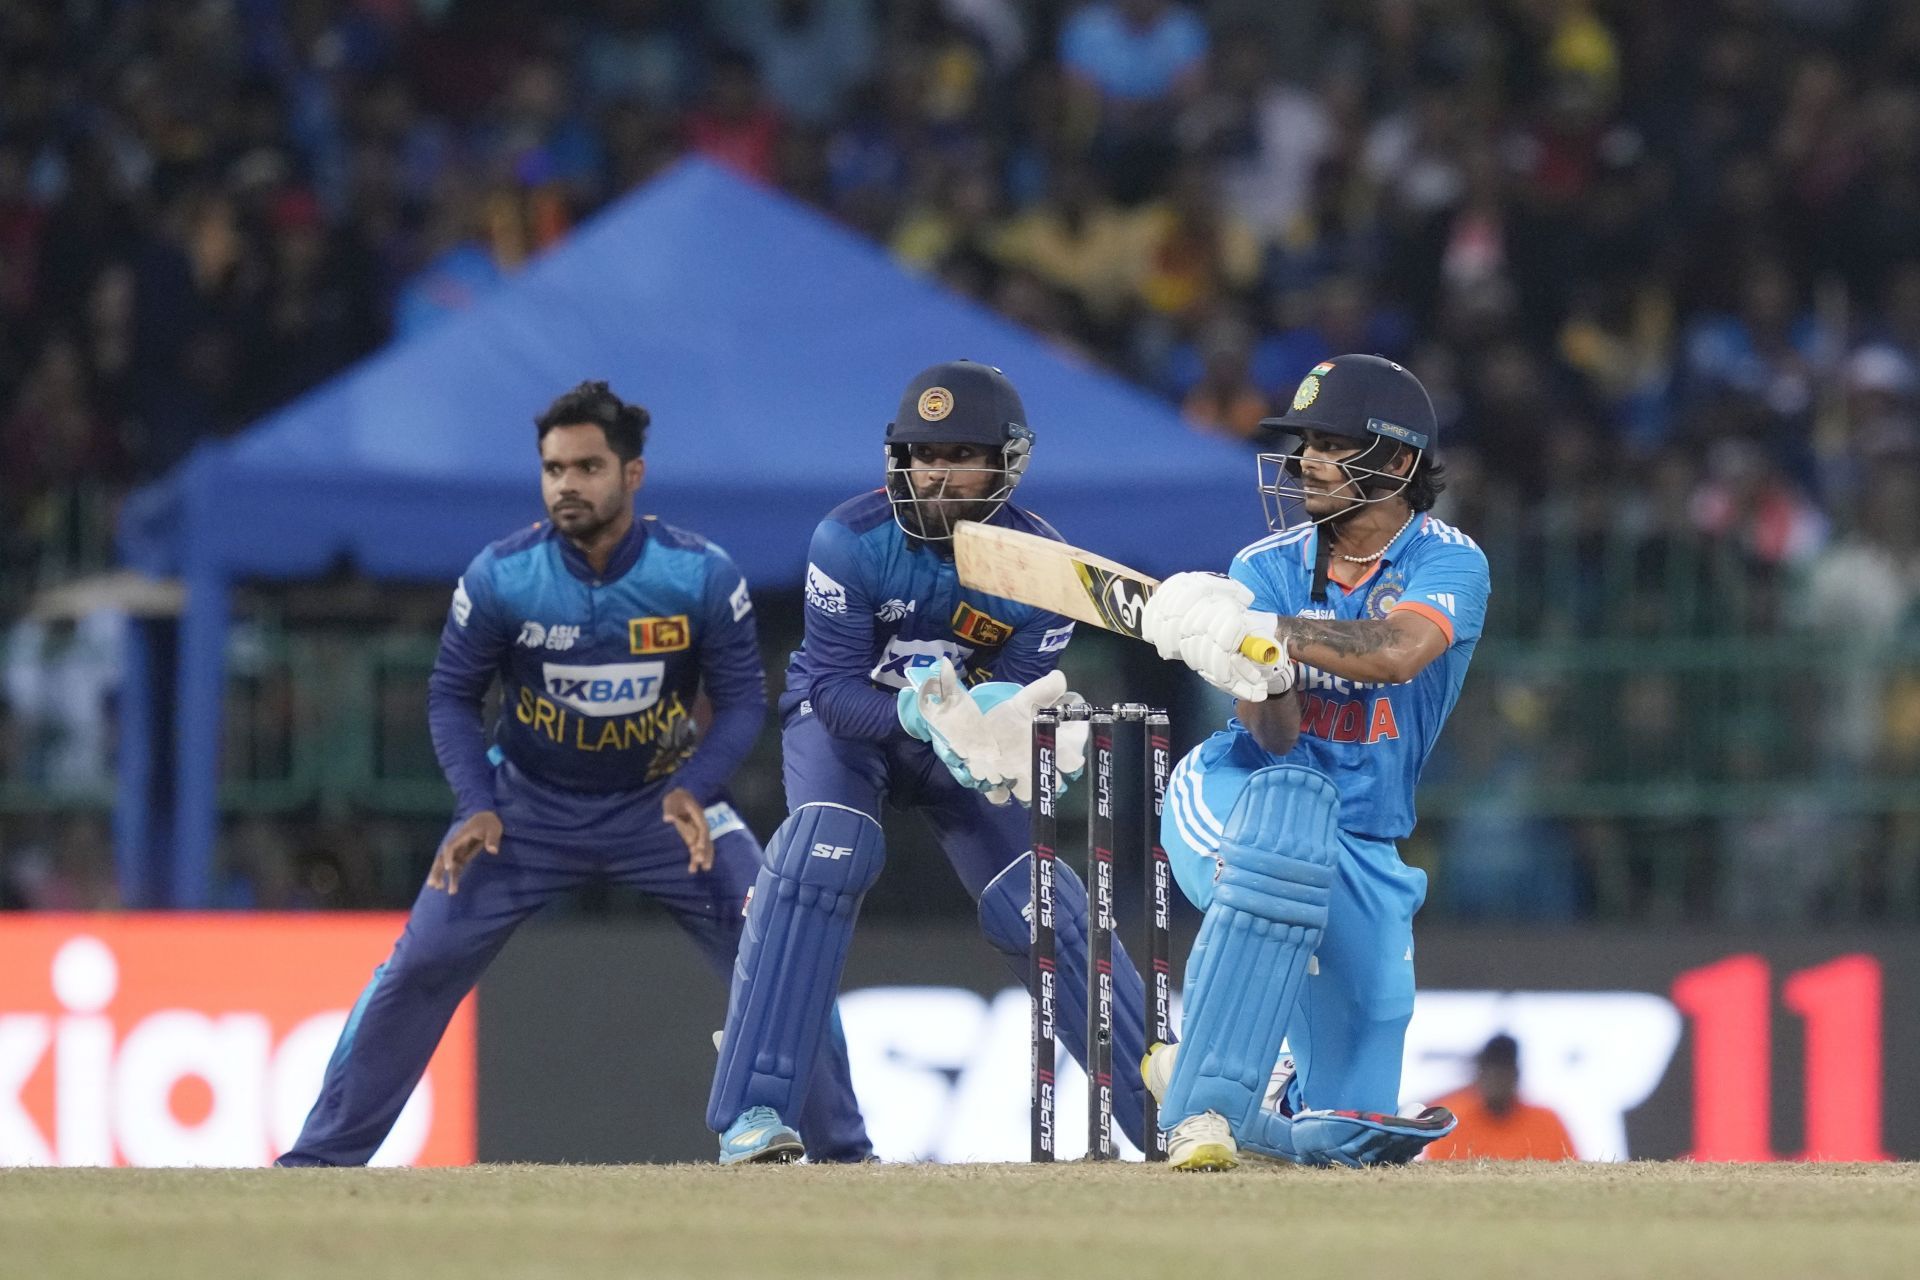 The Asia Cup saw Ishan Kishan bat in the middle order for all games except the final